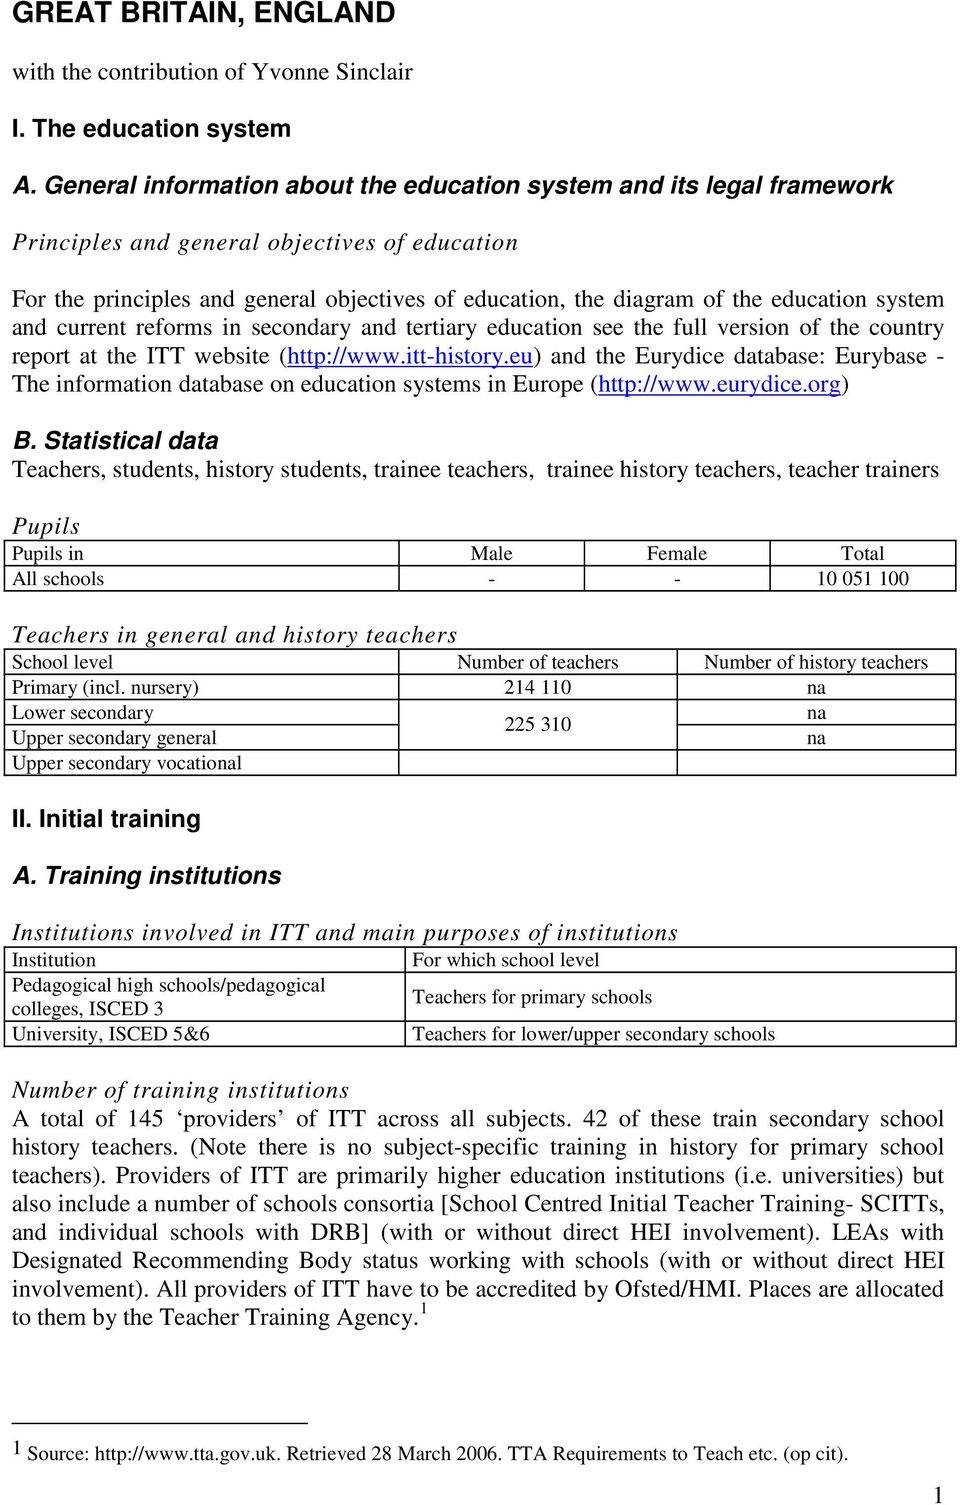 education system and current reforms in secondary and tertiary education see the full version of the country report at the ITT website (http://www.itt-history.